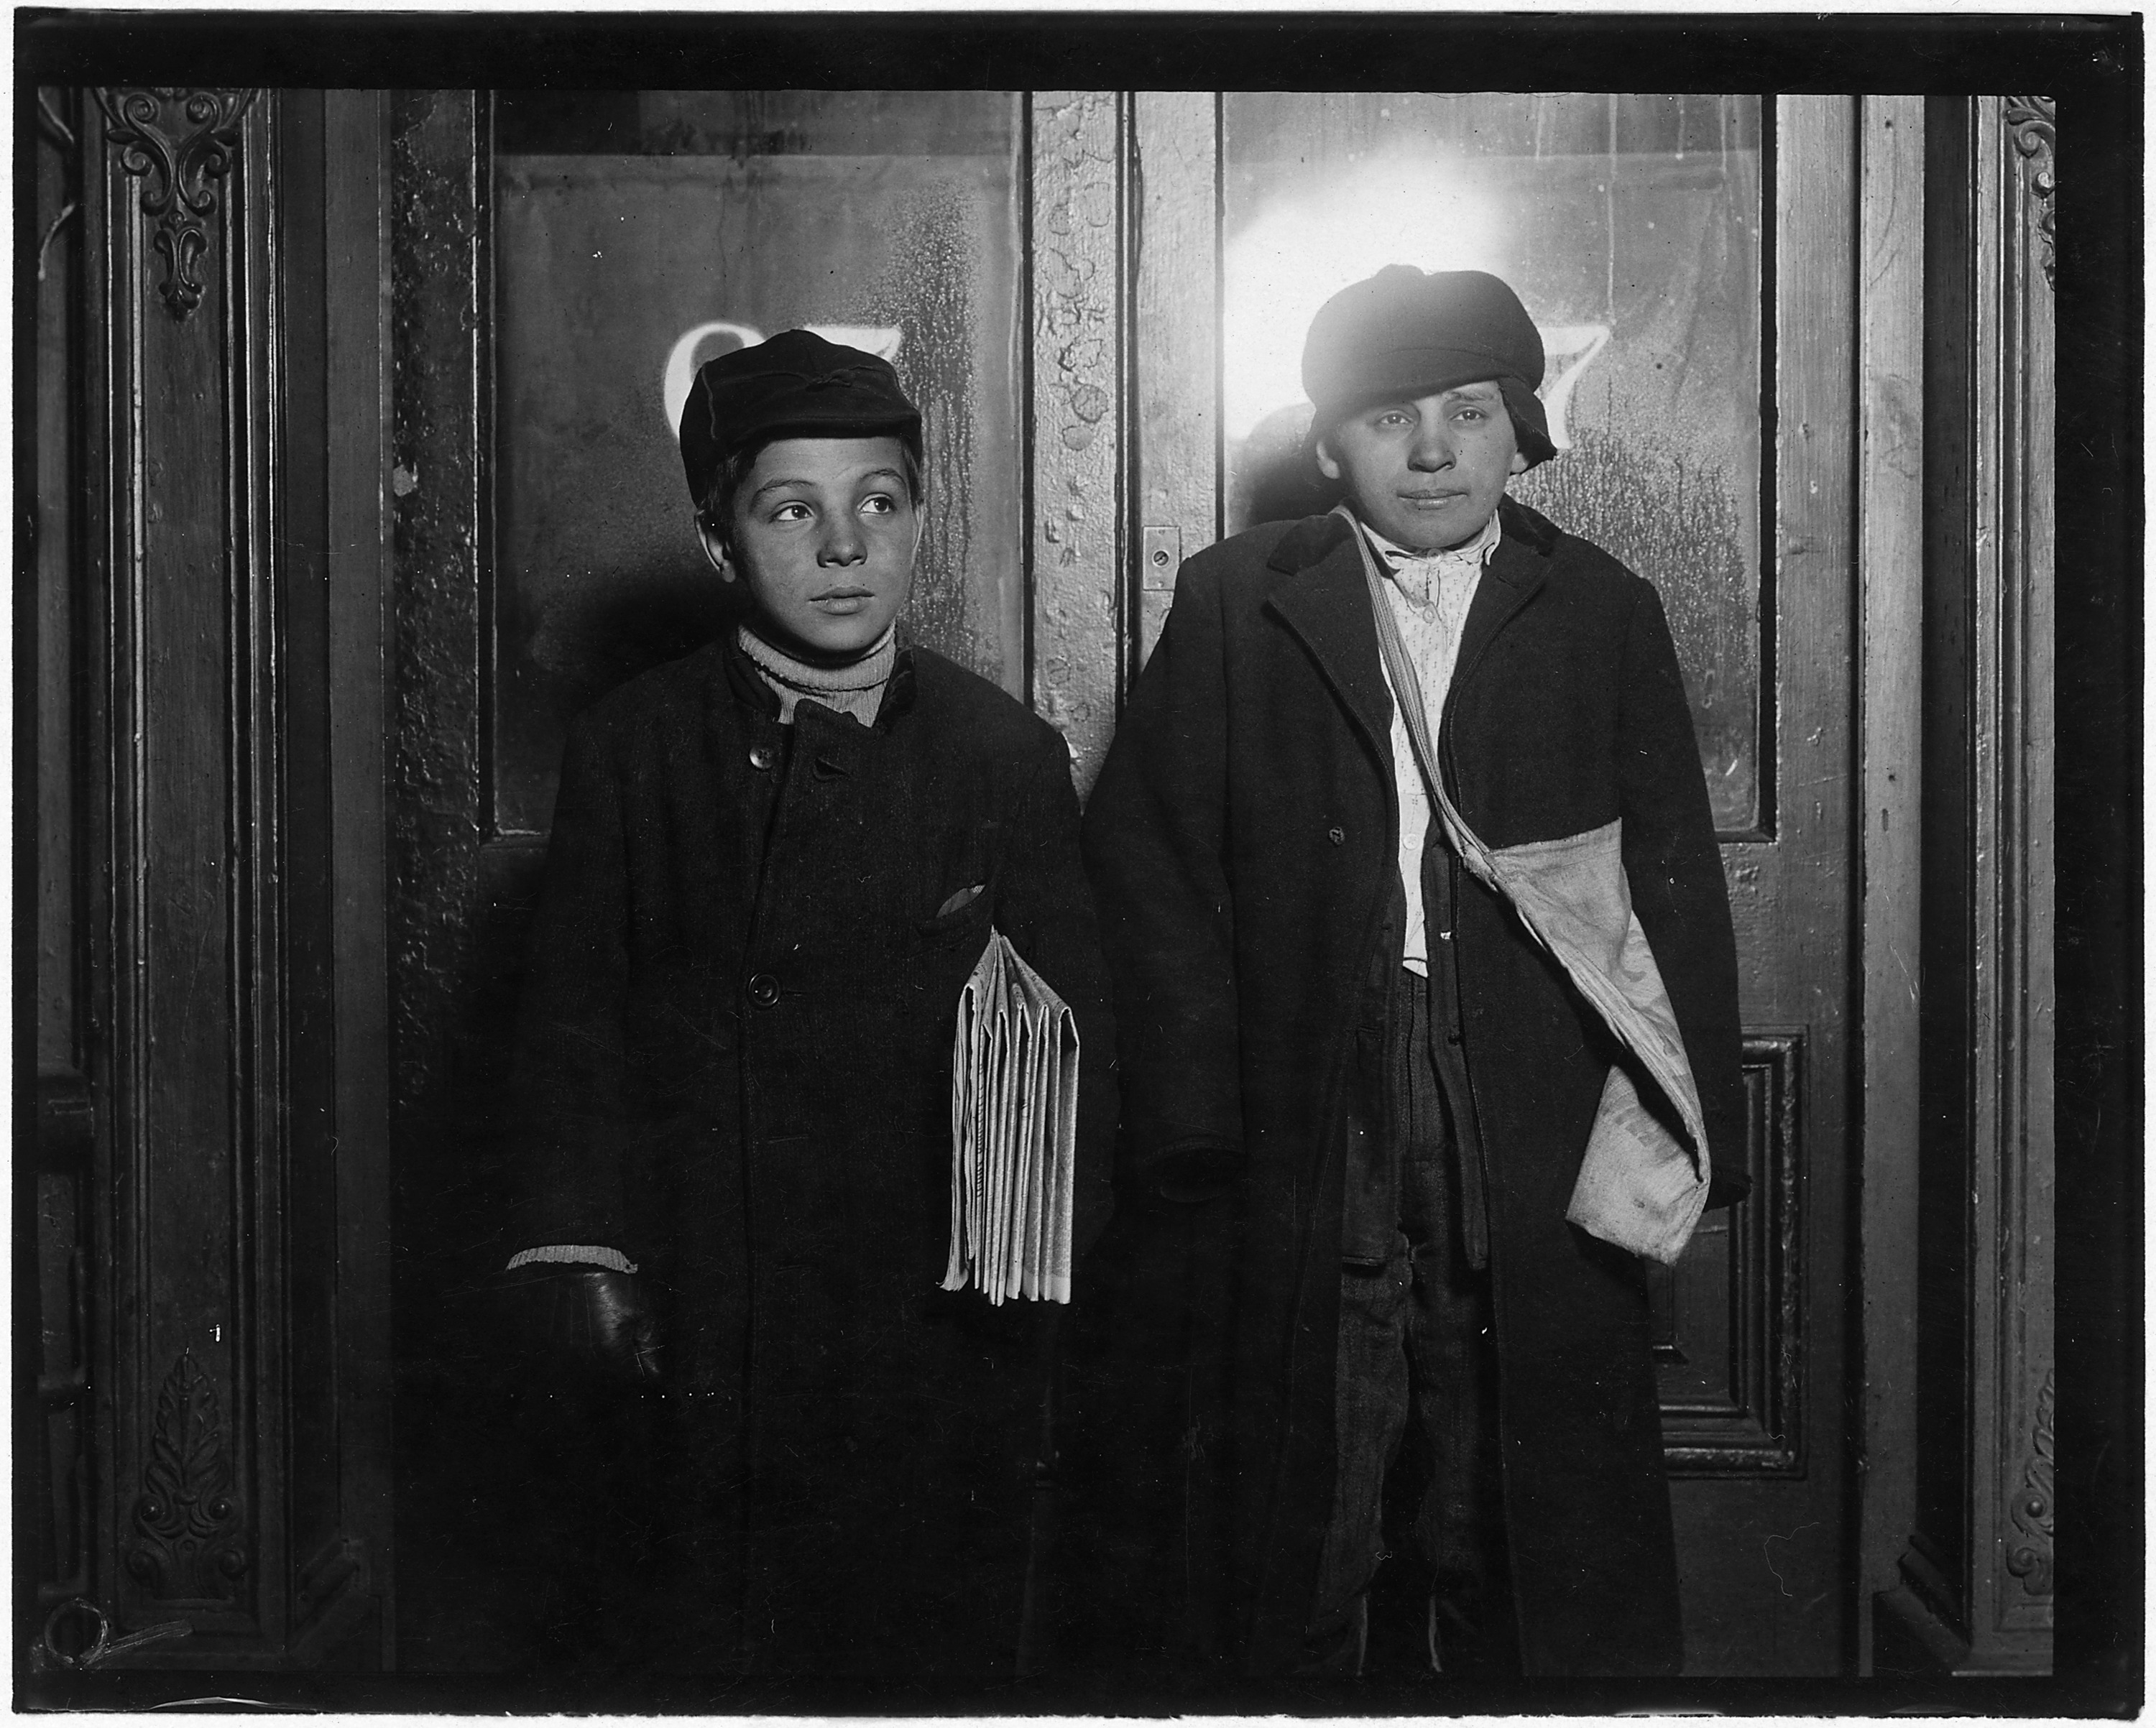 In a saloon doorway at 8-30 P.M. Left to right, George Cappello, 12 years old. Frank Laporter, 13 years old. Utica, N.Y. - NARA - 523278